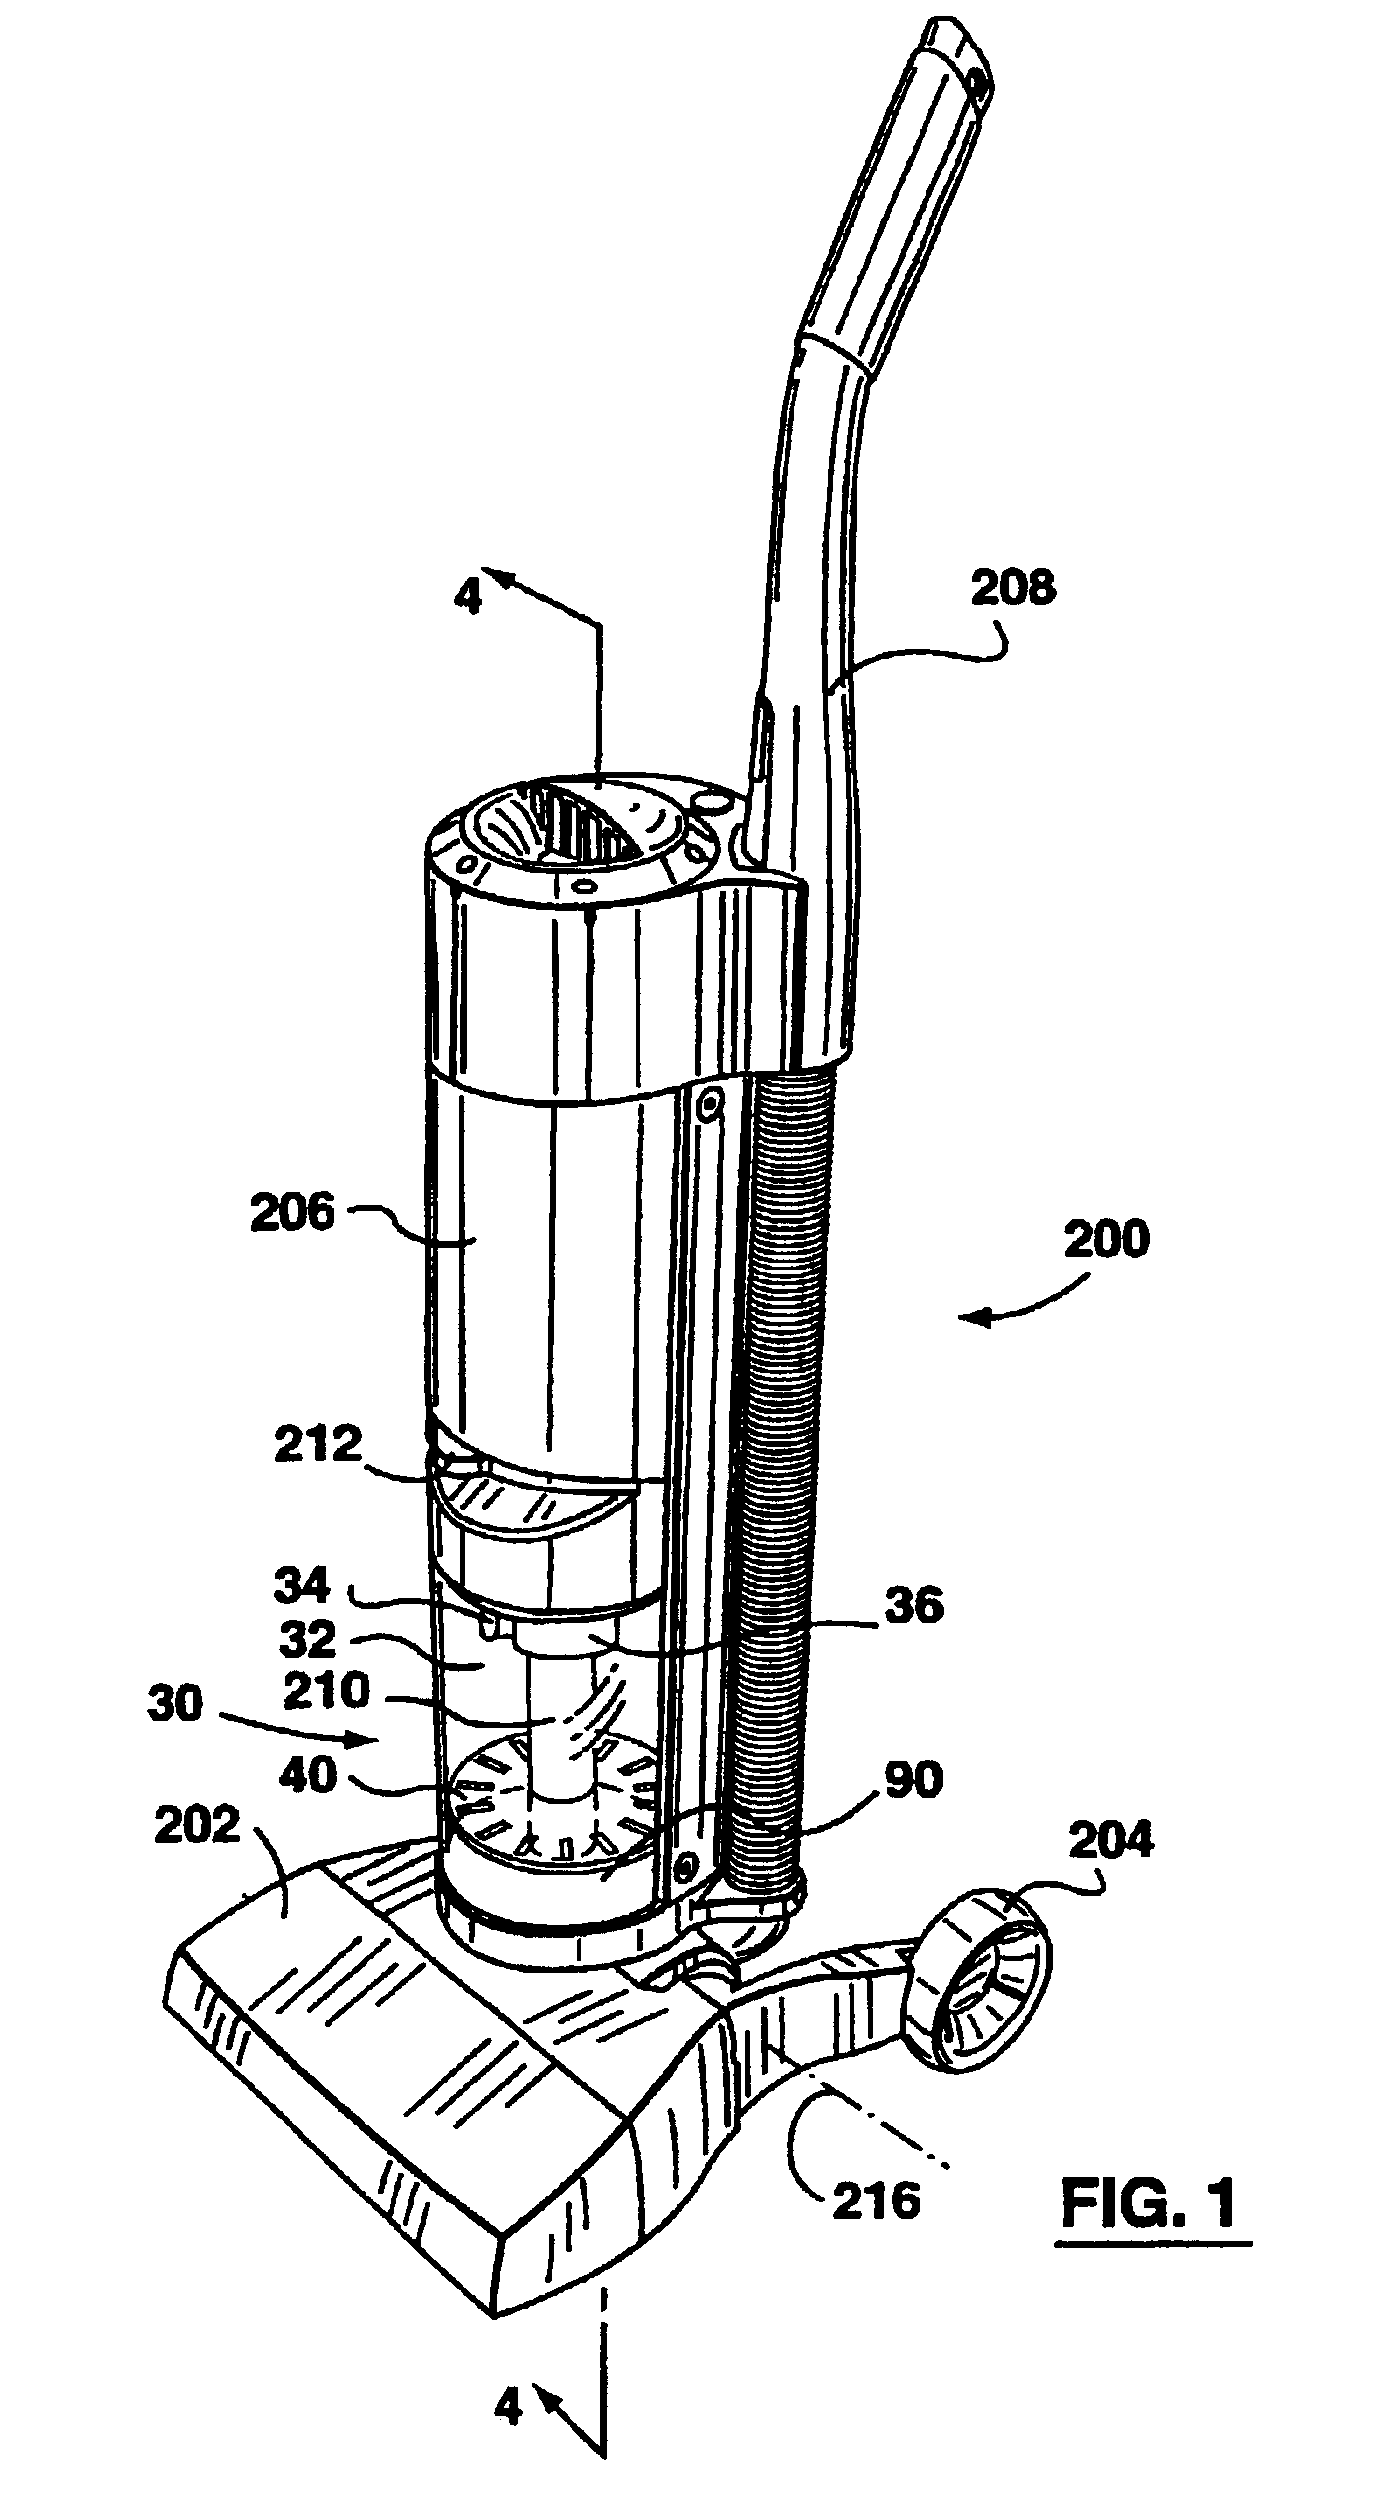 Apparatus and method for separating particles from a cyclonic fluid flow